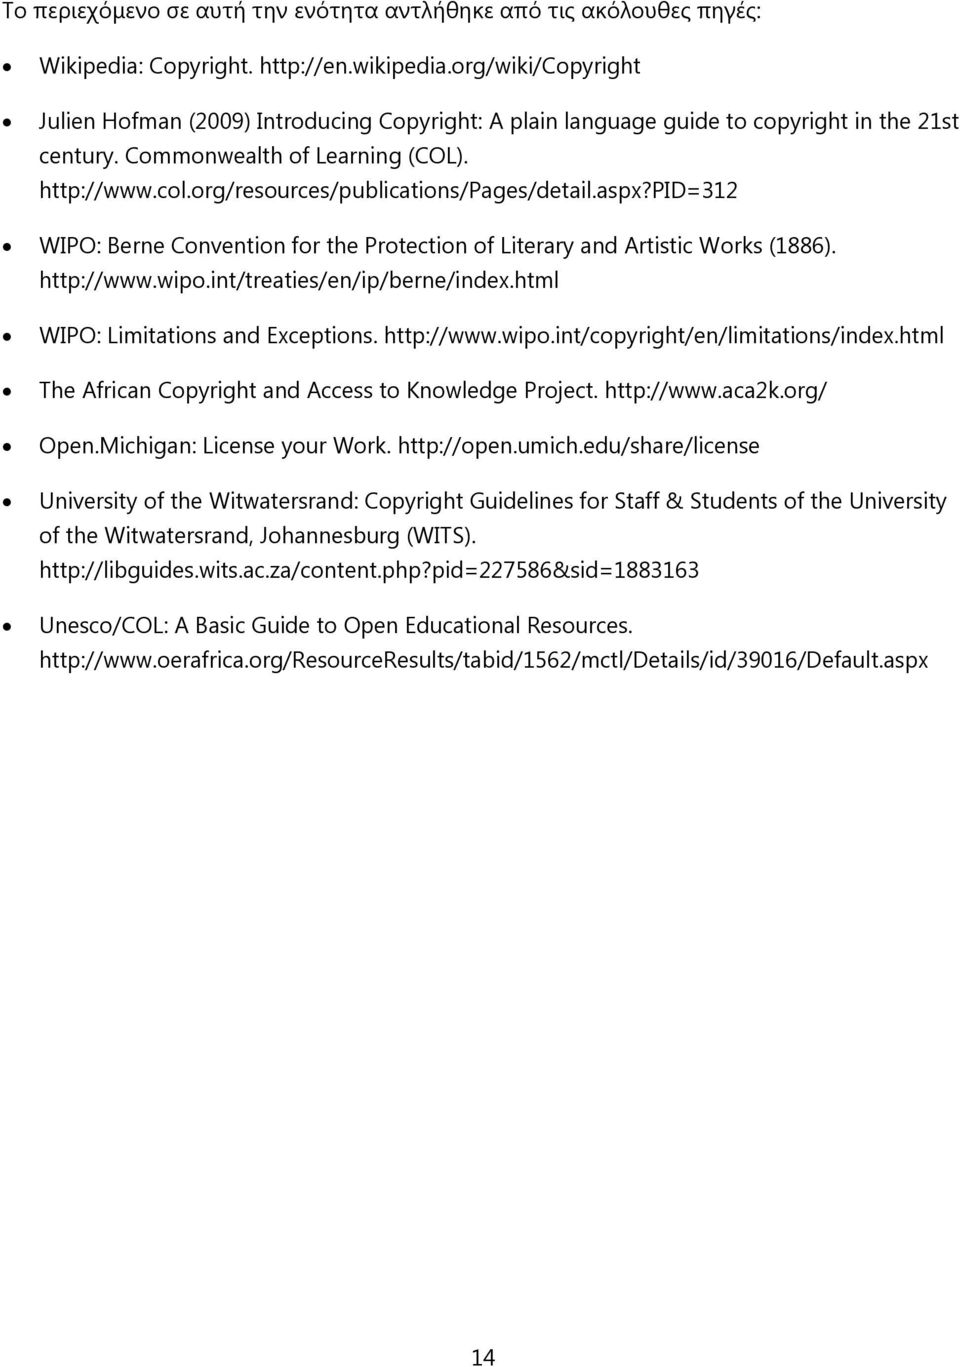 org/resources/publications/pages/detail.aspx?pid=312 WIPO: Berne Convention for the Protection of Literary and Artistic Works (1886). http://www.wipo.int/treaties/en/ip/berne/index.